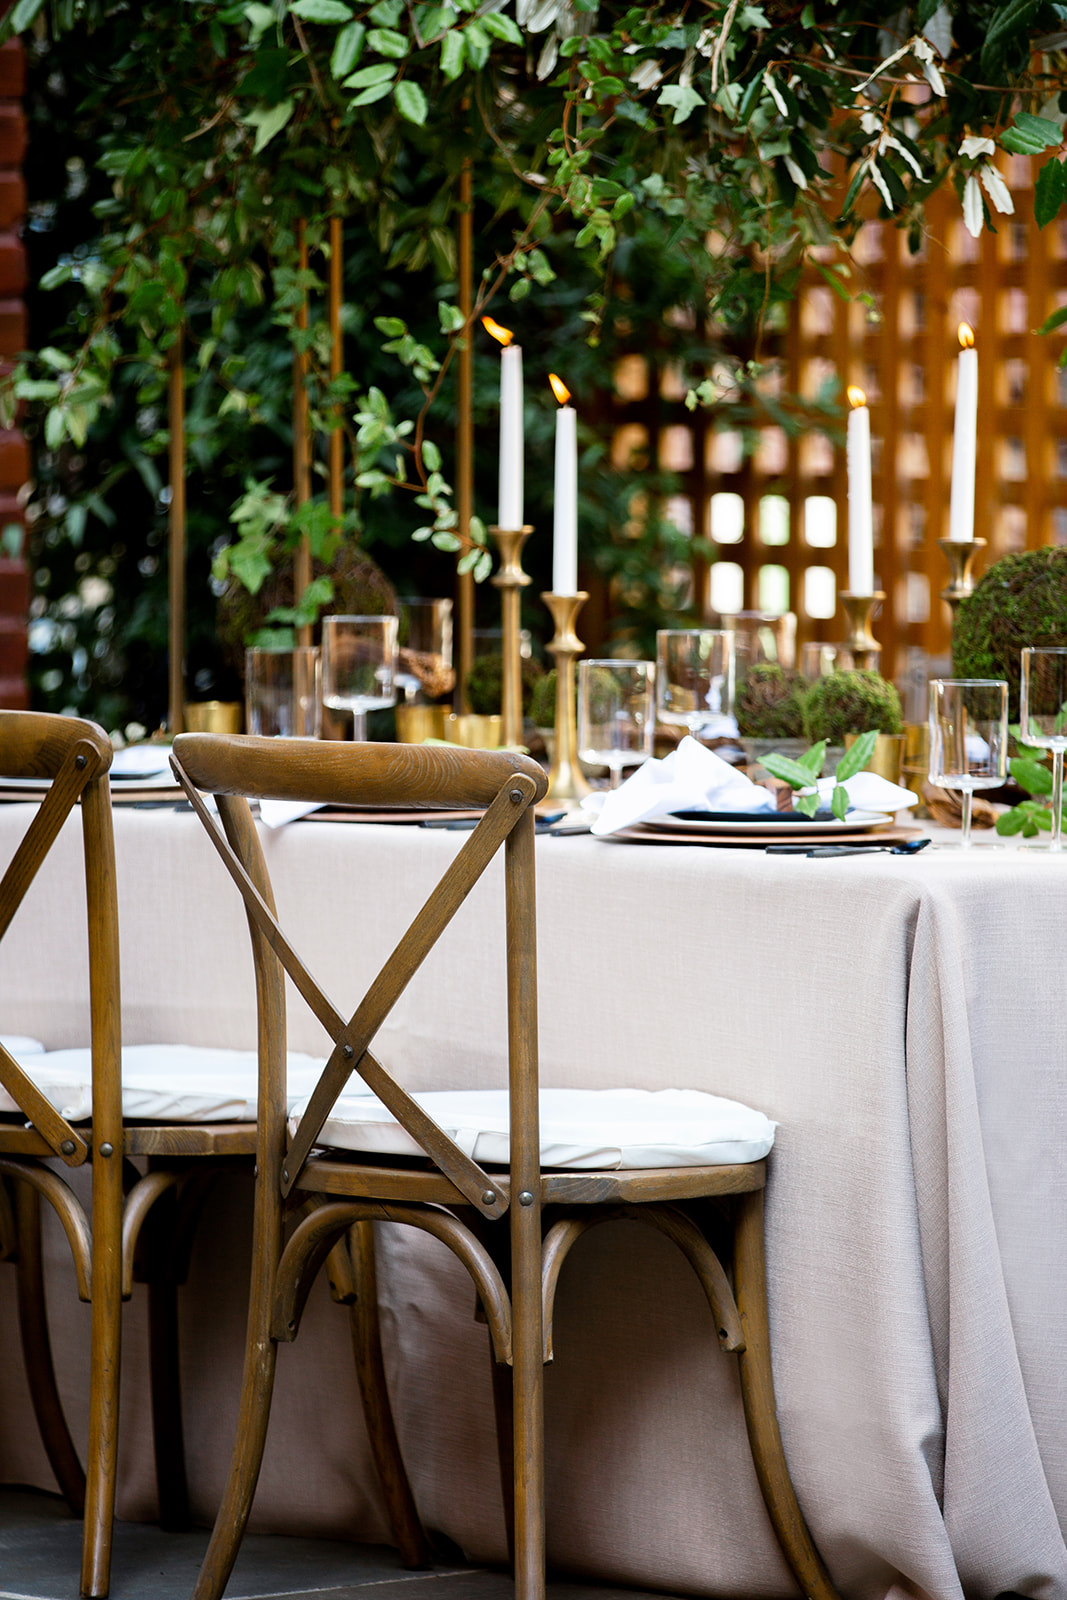 7 Micro Wedding Tabletop Inspirations For Backyard and Intimate Weddings - Image Property of www.j-dphoto.com